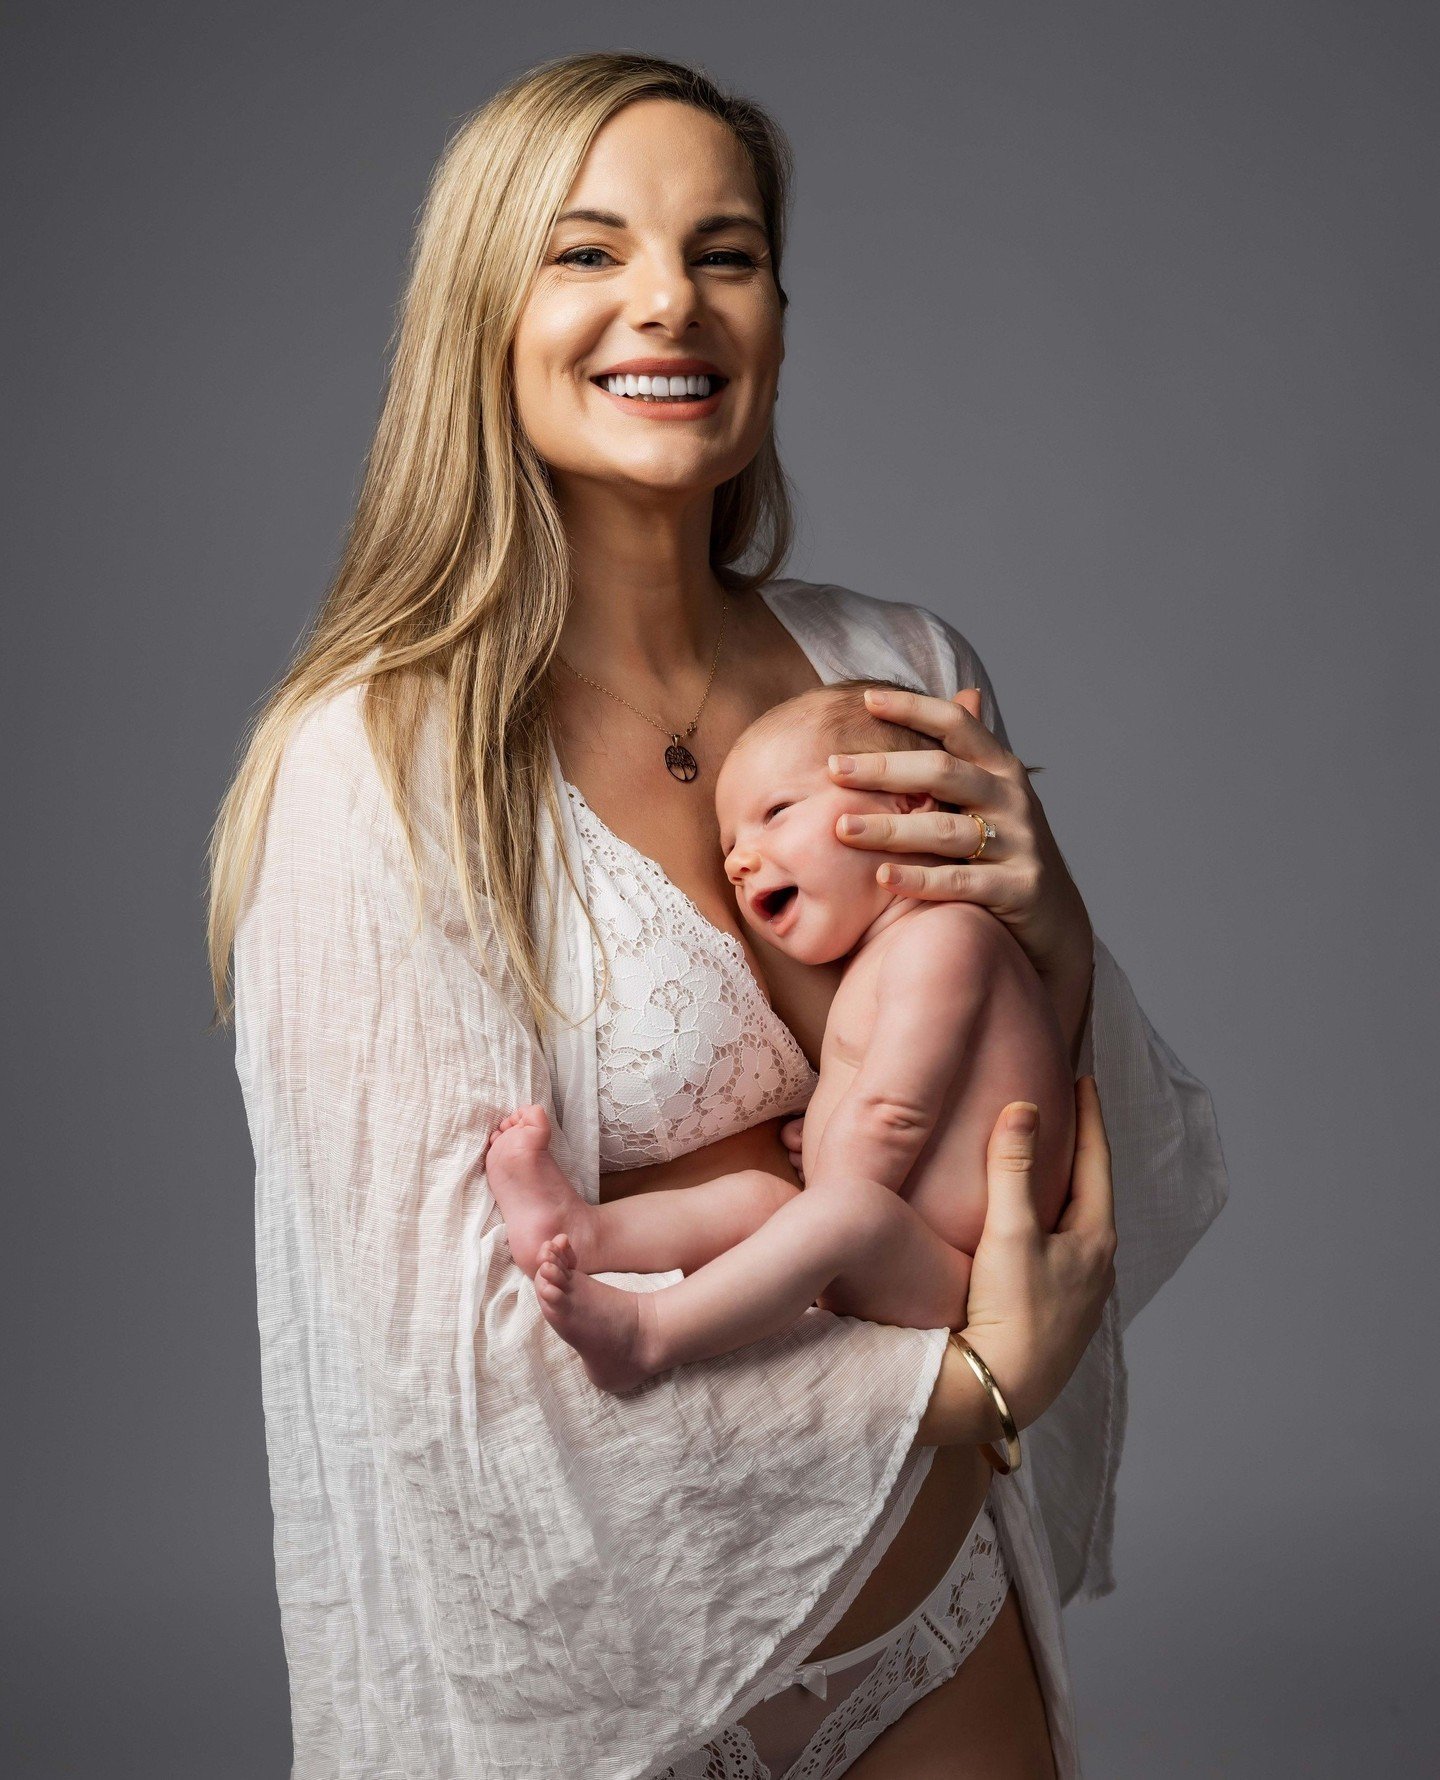 🥰 The Bond That Shines Brightest: Celebrating Mothers Day with Life Portraits! 🥰 ⁠
⁠
This Mother's Day, we're celebrating the most powerful connections in life - the love between mothers and their children! ❤️⁠
⁠
Swipe through to see some incredibl